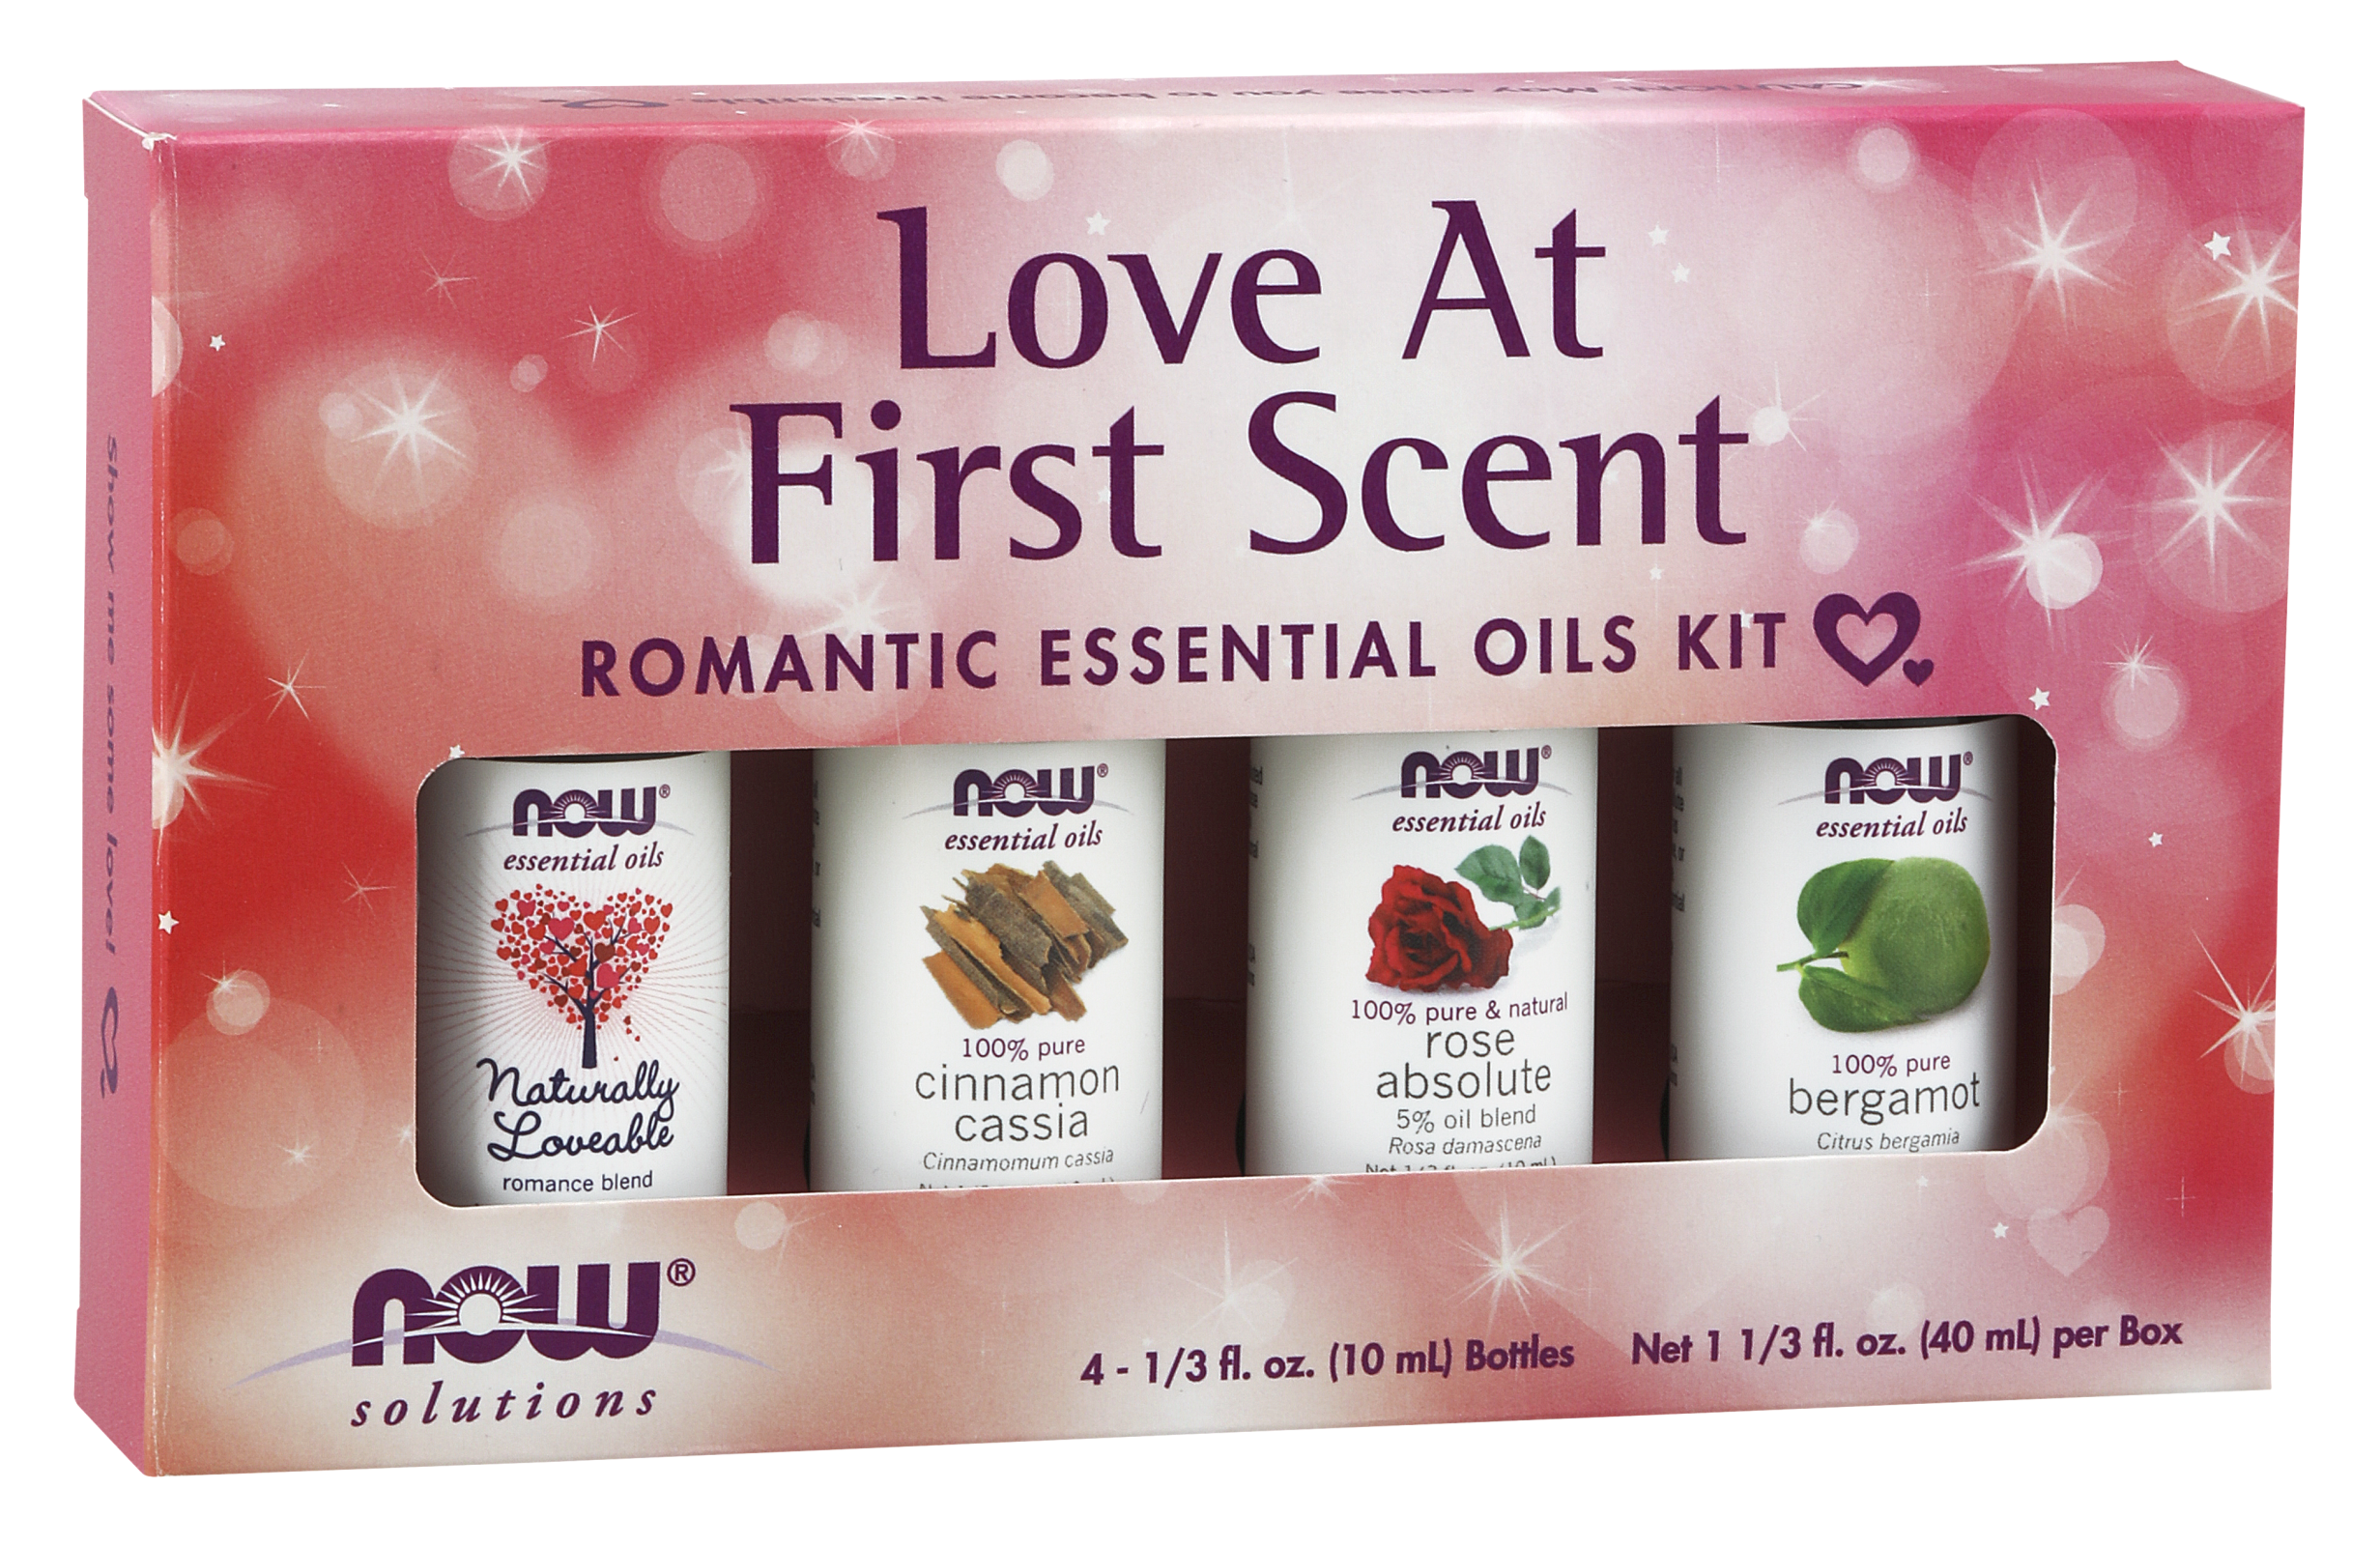 Love At First Scent Essential Oils Kit Box Front